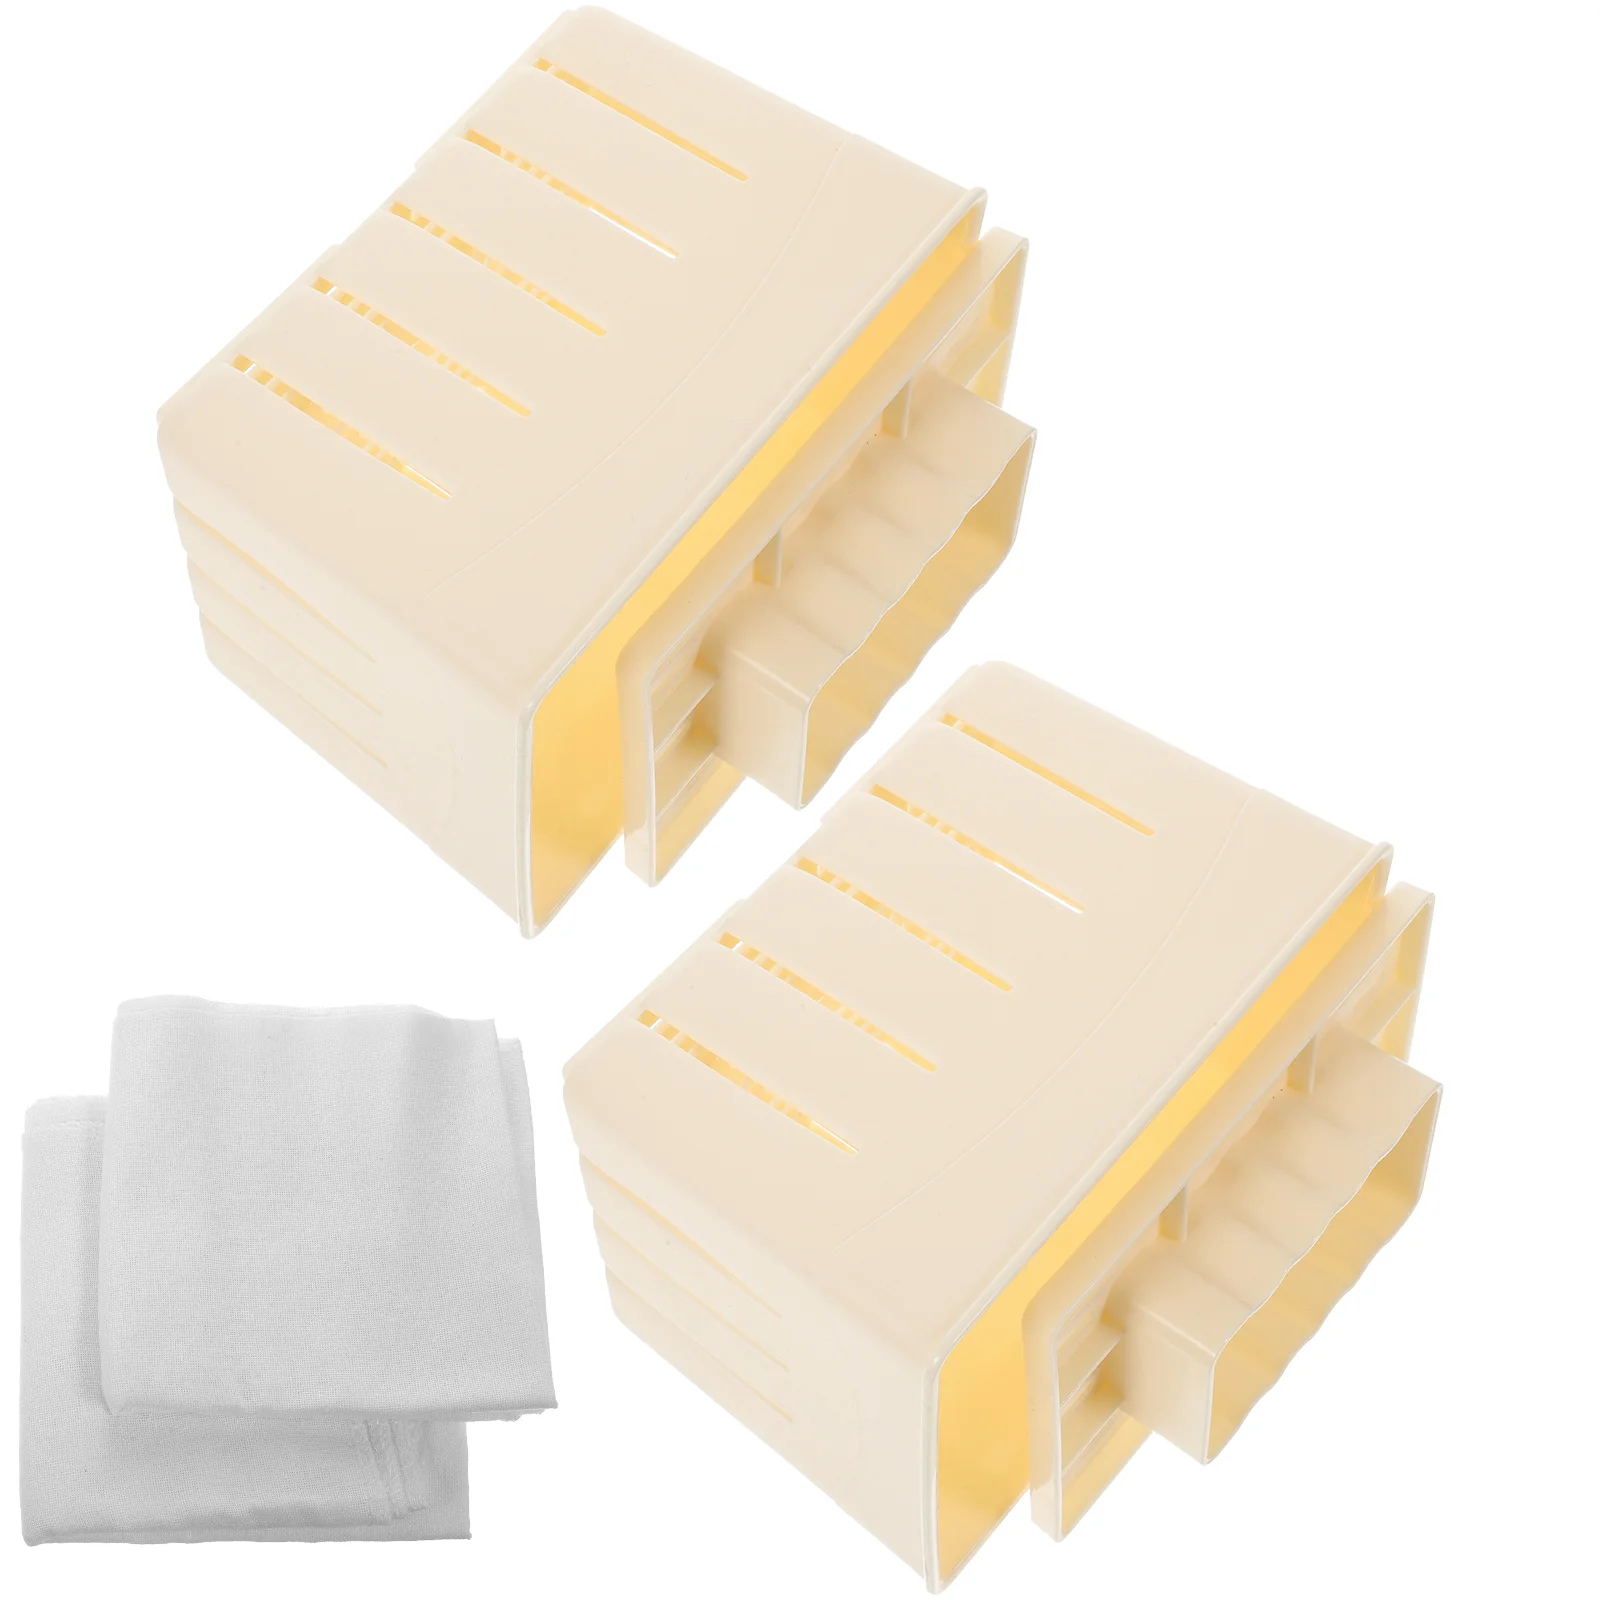 

Homemade Tofu Stamper Molds Plastic Maker Press Convenient Kitchen Tool Sturdy Making DIY Moulds Cheese Organic Squeegee